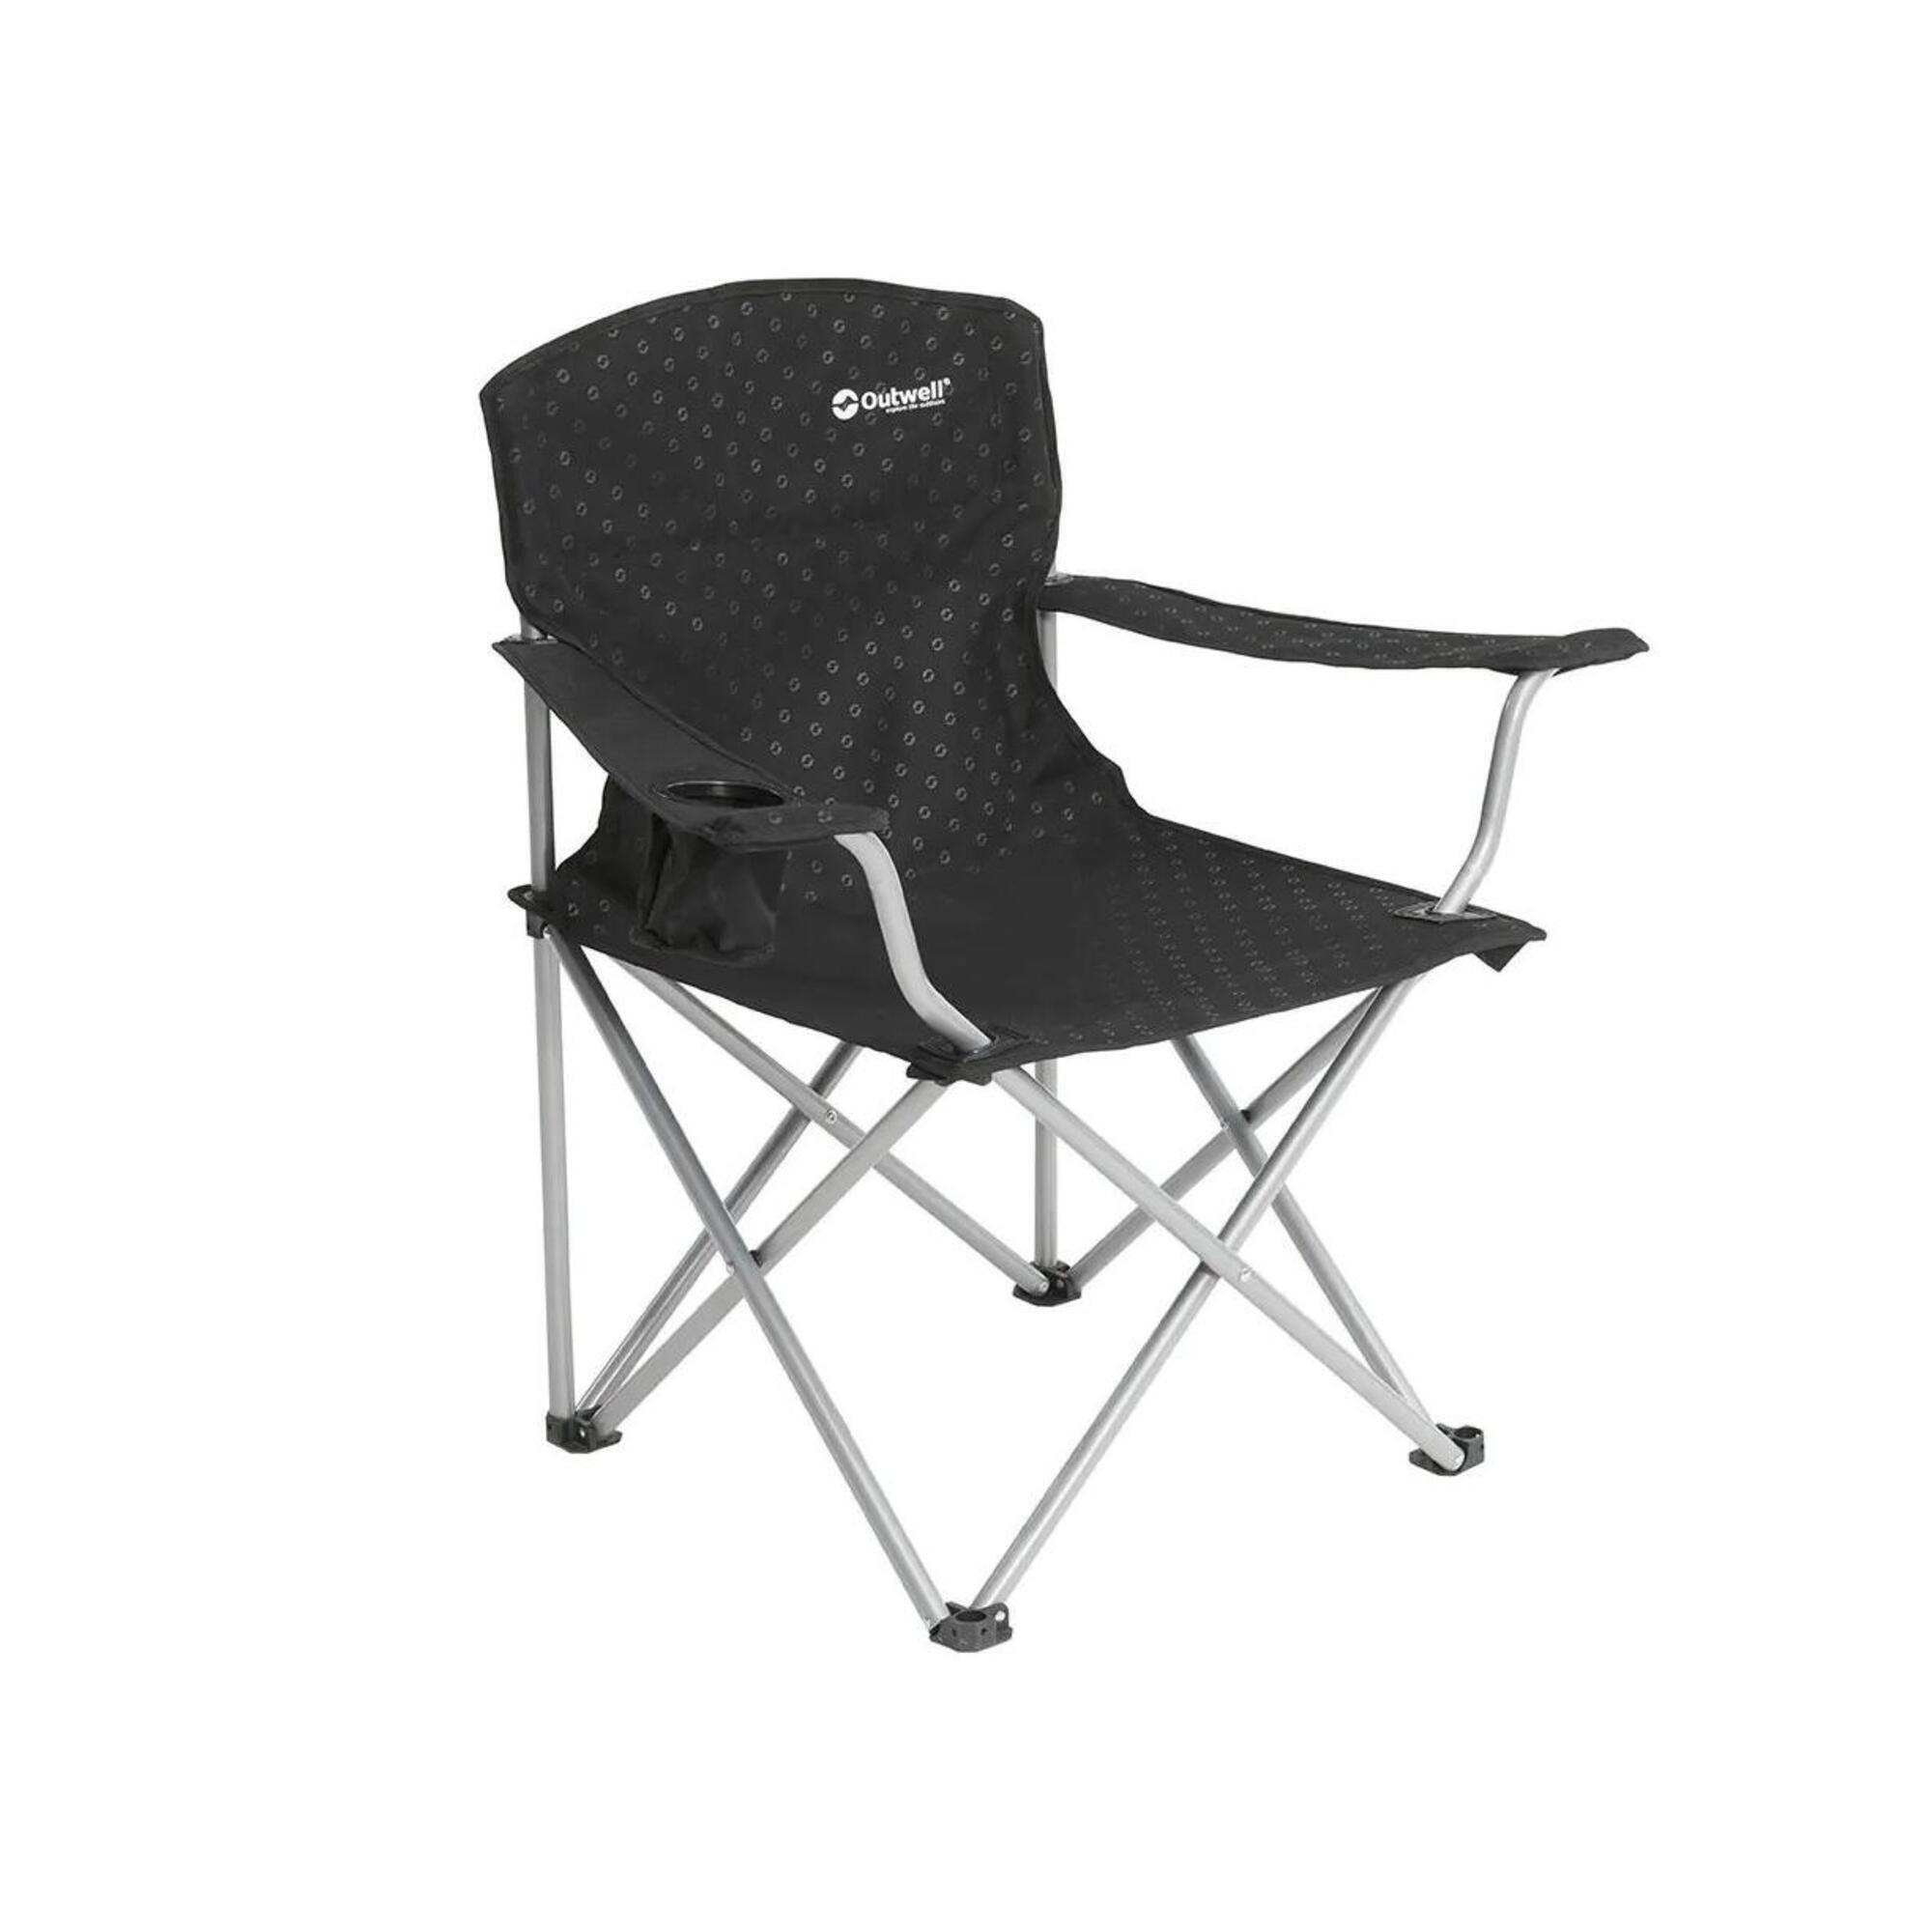 OUTWELL Catamarca Folding Camping Chair Black